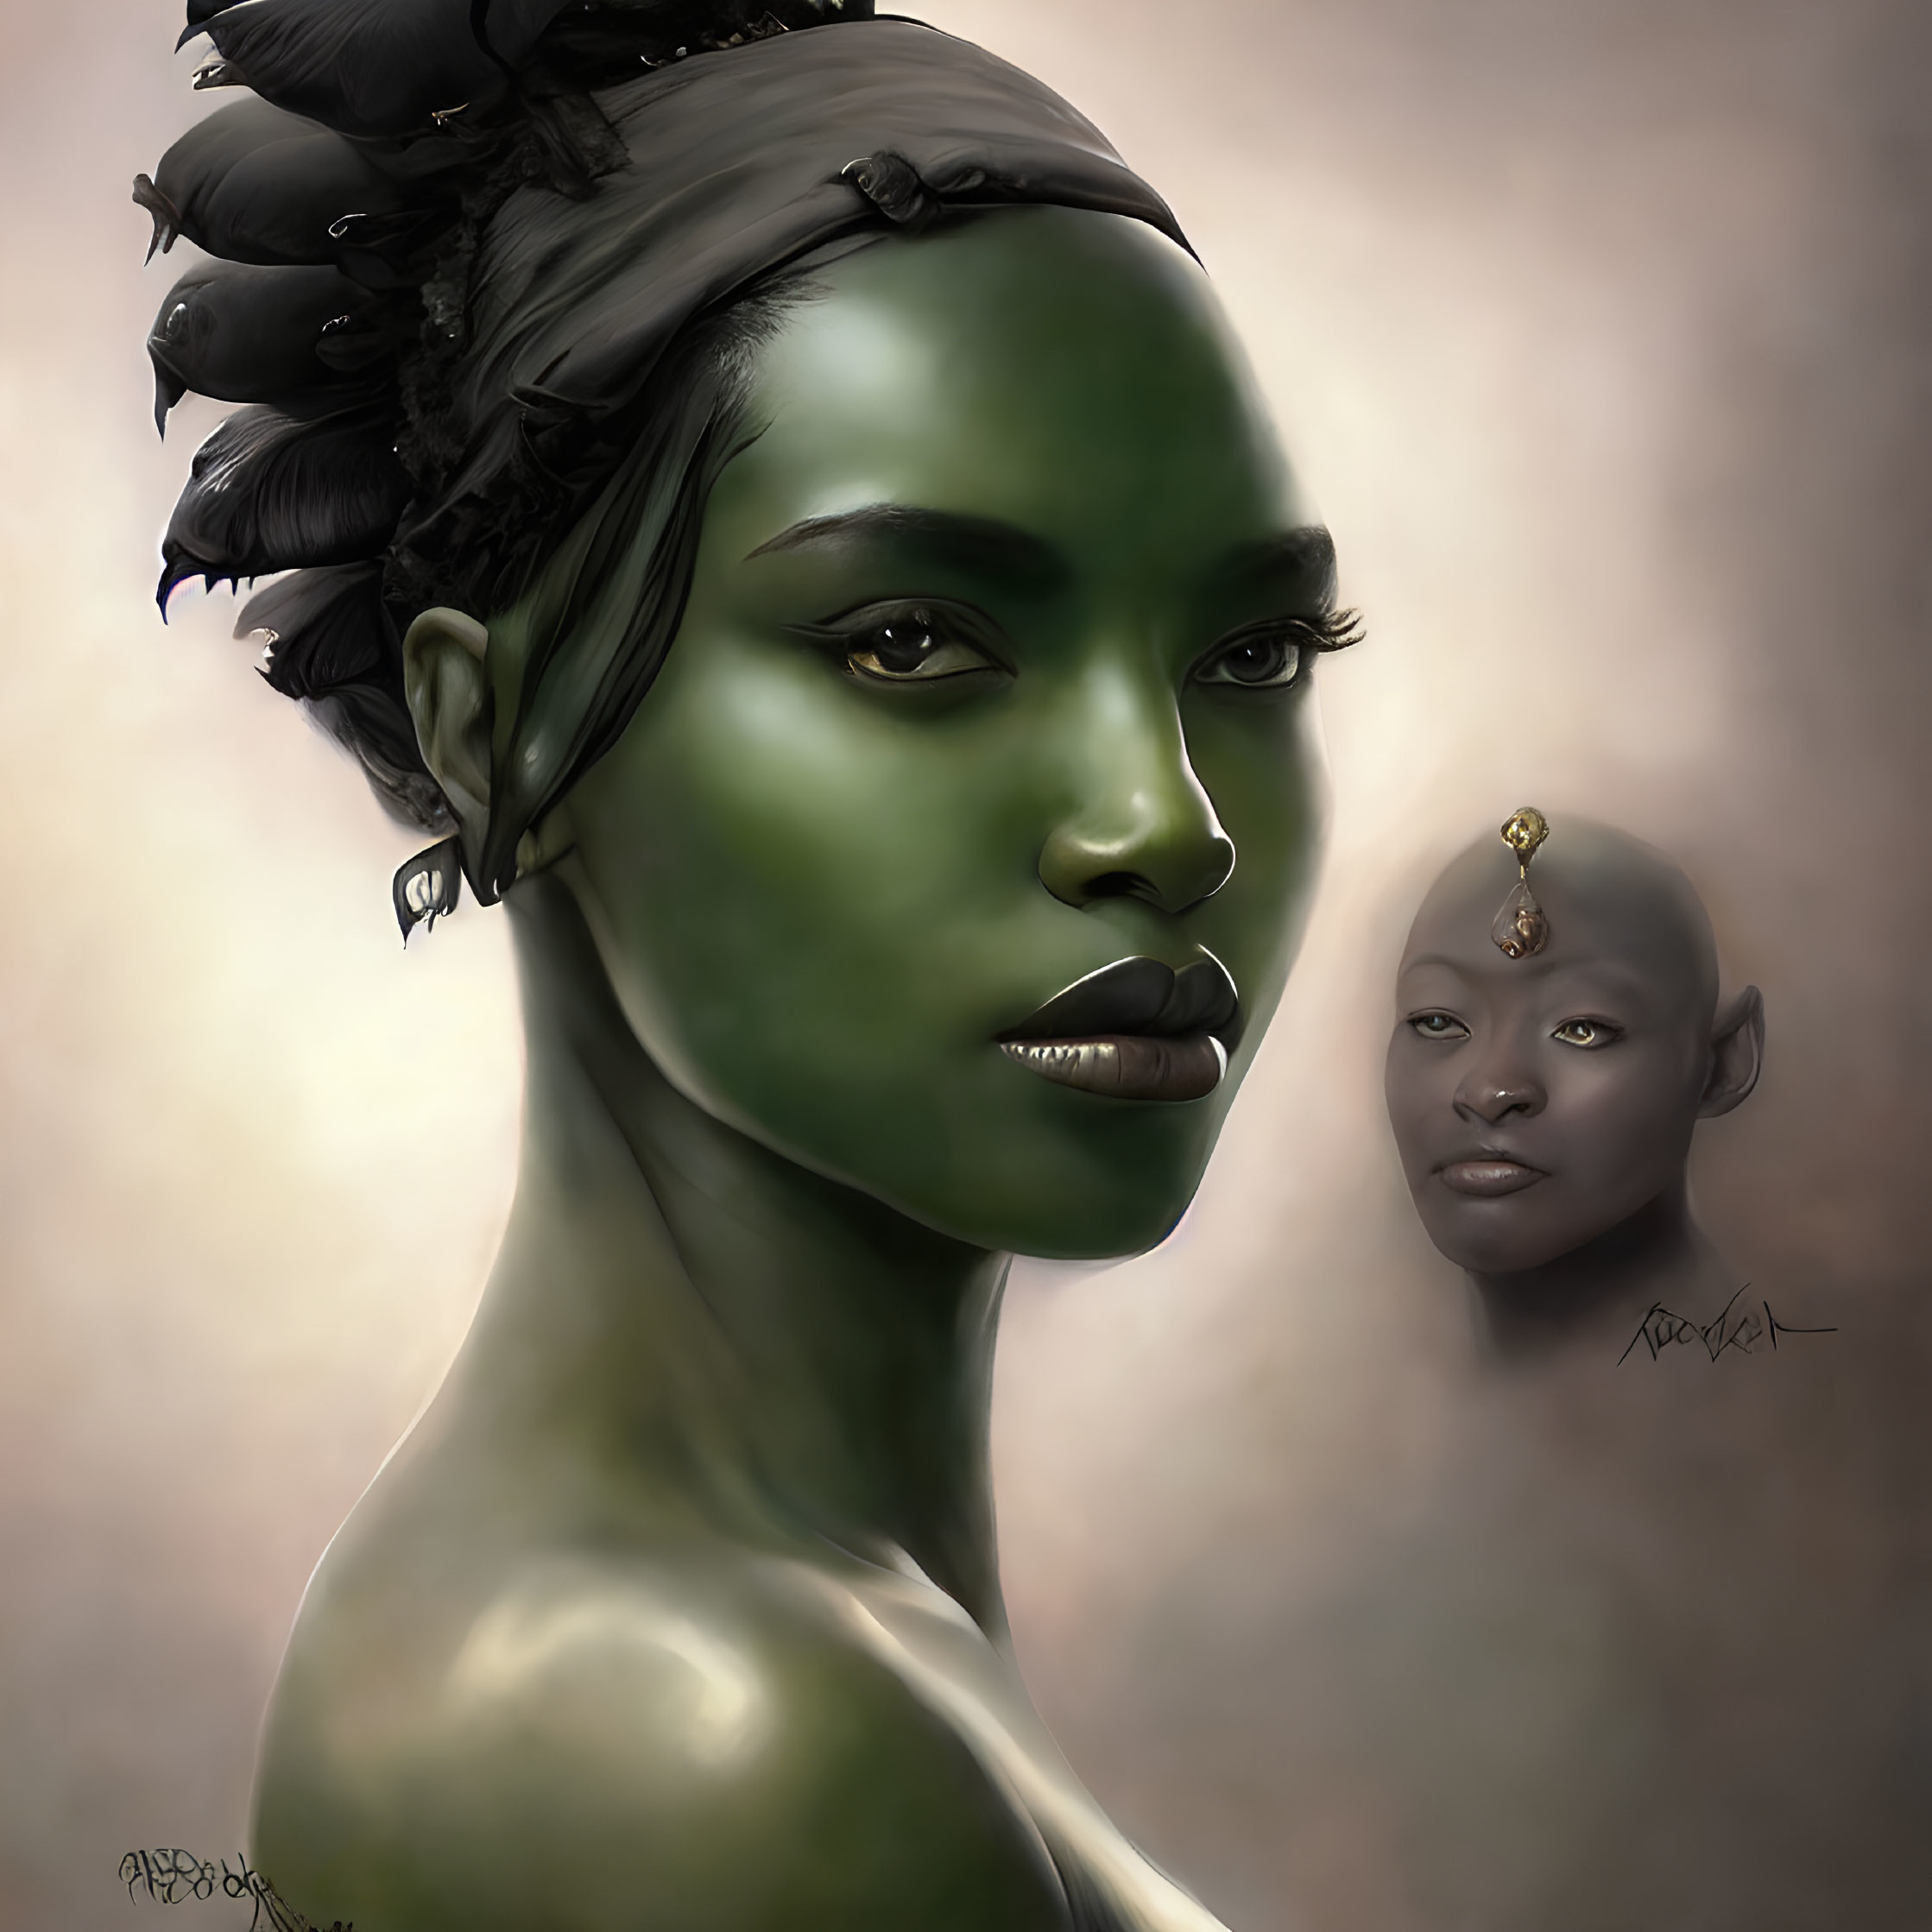 Stylized digital artwork of two figures with green skin and intense gazes